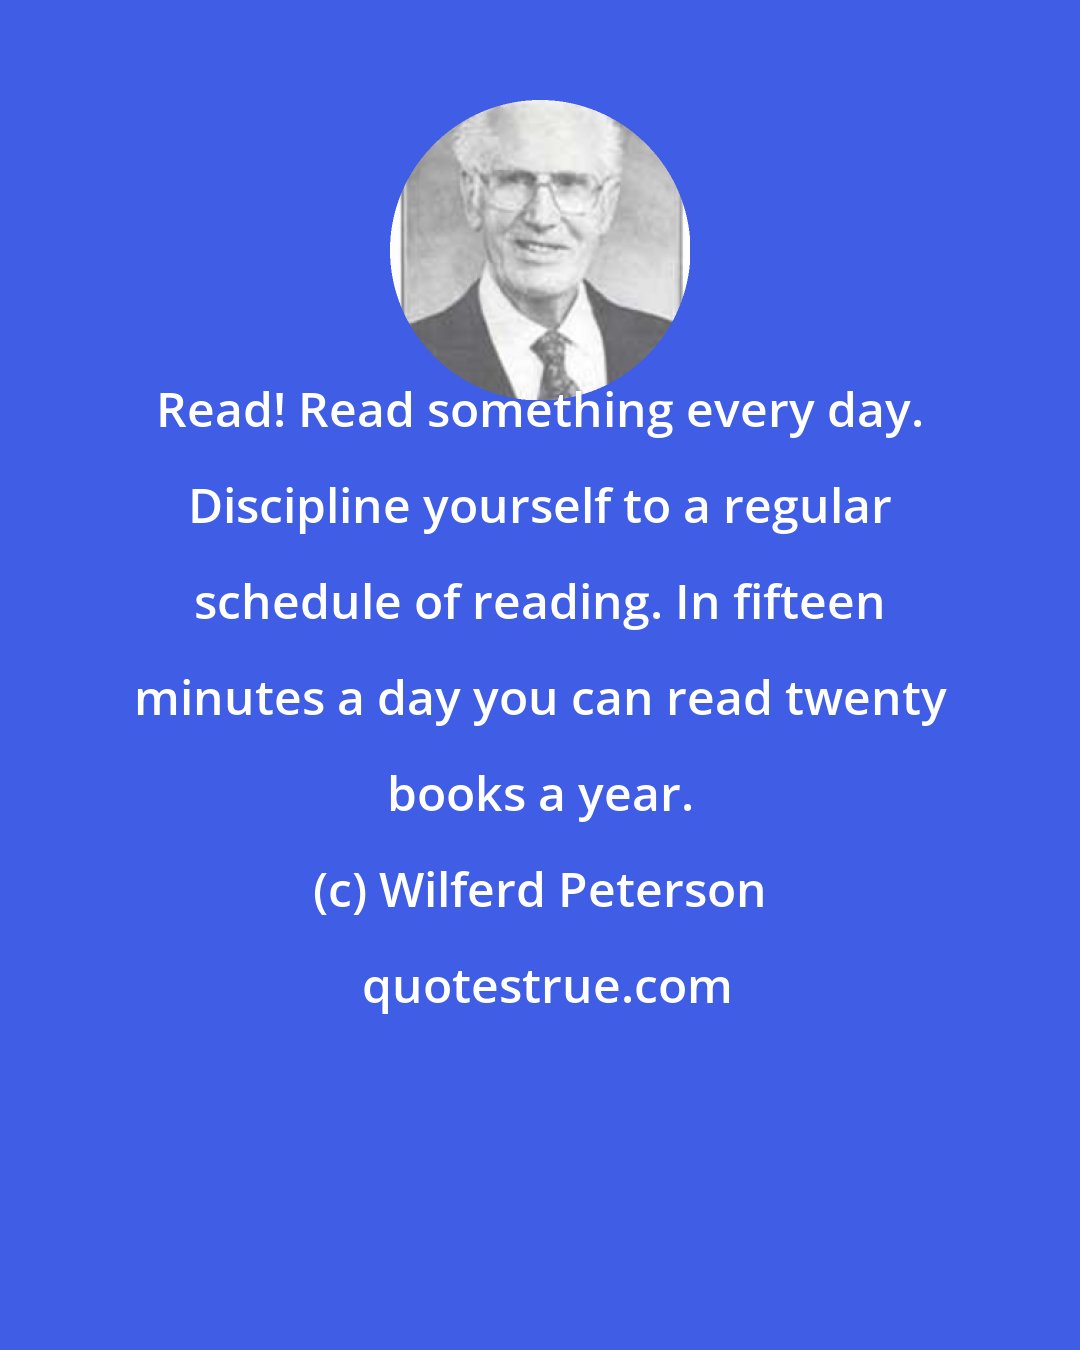 Wilferd Peterson: Read! Read something every day. Discipline yourself to a regular schedule of reading. In fifteen minutes a day you can read twenty books a year.